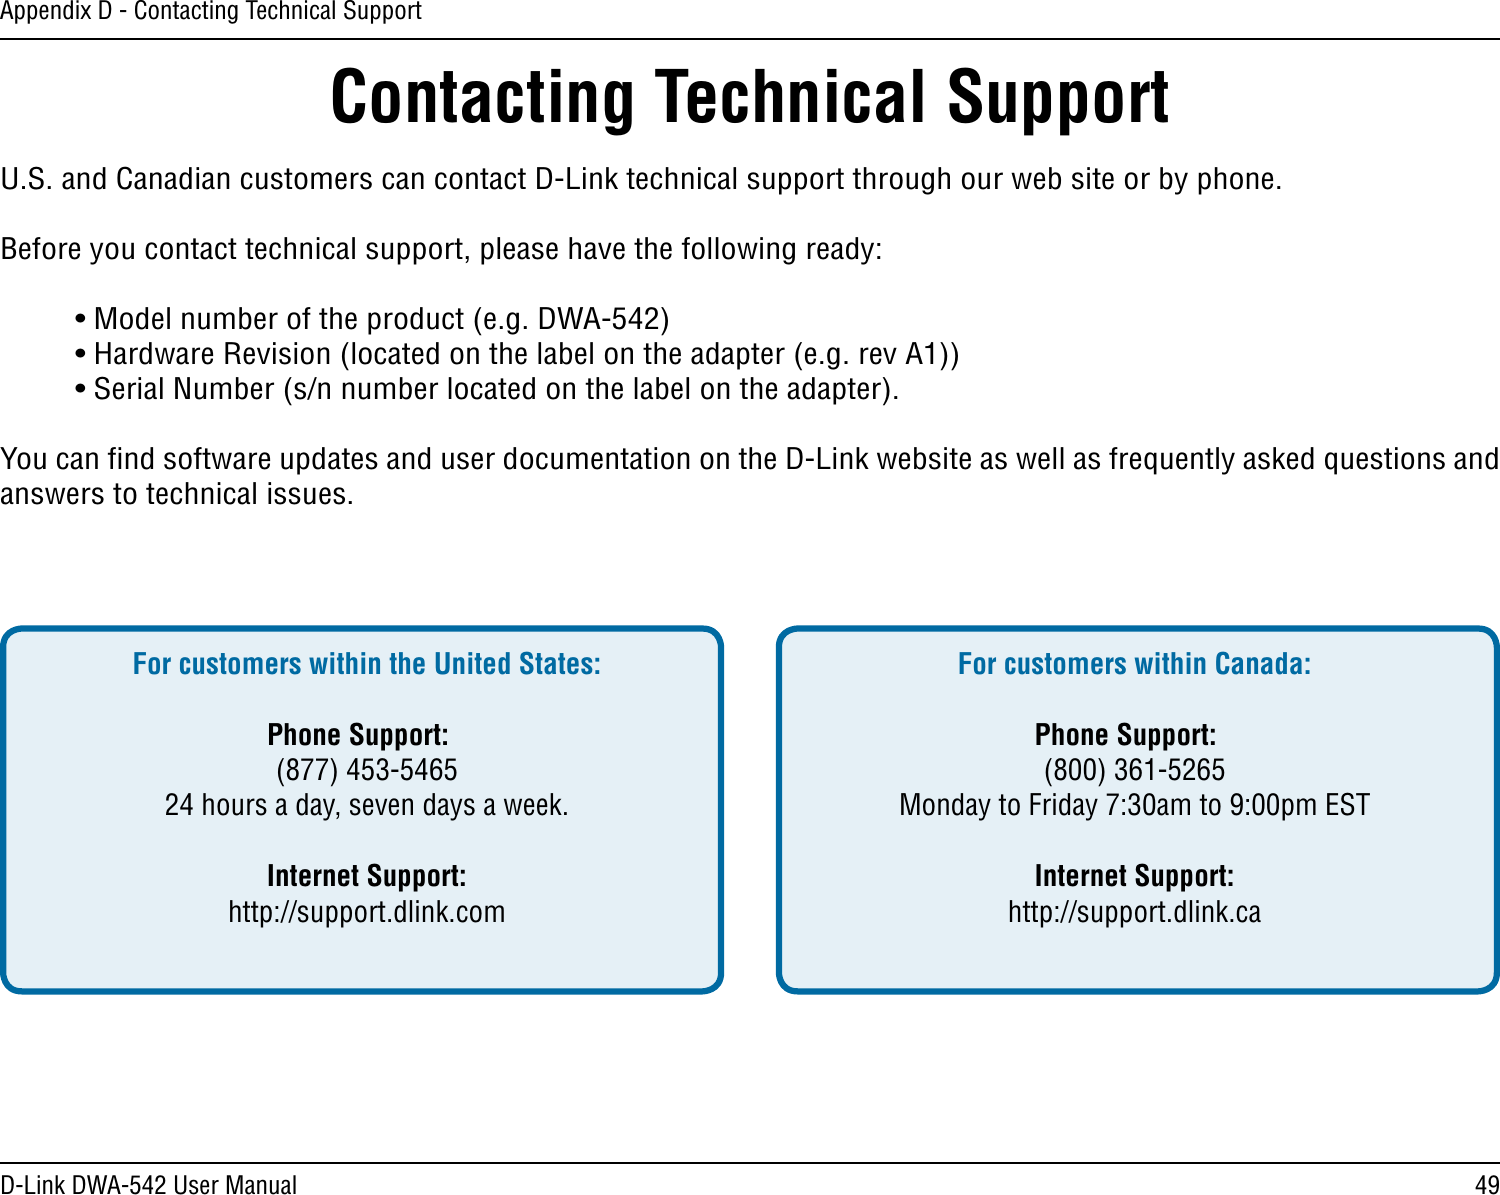 49D-Link DWA-542 User ManualAppendix D - Contacting Technical SupportContacting Technical SupportU.S. and Canadian customers can contact D-Link technical support through our web site or by phone.Before you contact technical support, please have the following ready:  • Model number of the product (e.g. DWA-542)  • Hardware Revision (located on the label on the adapter (e.g. rev A1))  • Serial Number (s/n number located on the label on the adapter). You can ﬁnd software updates and user documentation on the D-Link website as well as frequently asked questions and answers to technical issues.For customers within the United States: Phone Support:  (877) 453-5465  24 hours a day, seven days a week. Internet Support:  http://support.dlink.com For customers within Canada: Phone Support:  (800) 361-5265  Monday to Friday 7:30am to 9:00pm EST  Internet Support:  http://support.dlink.ca 